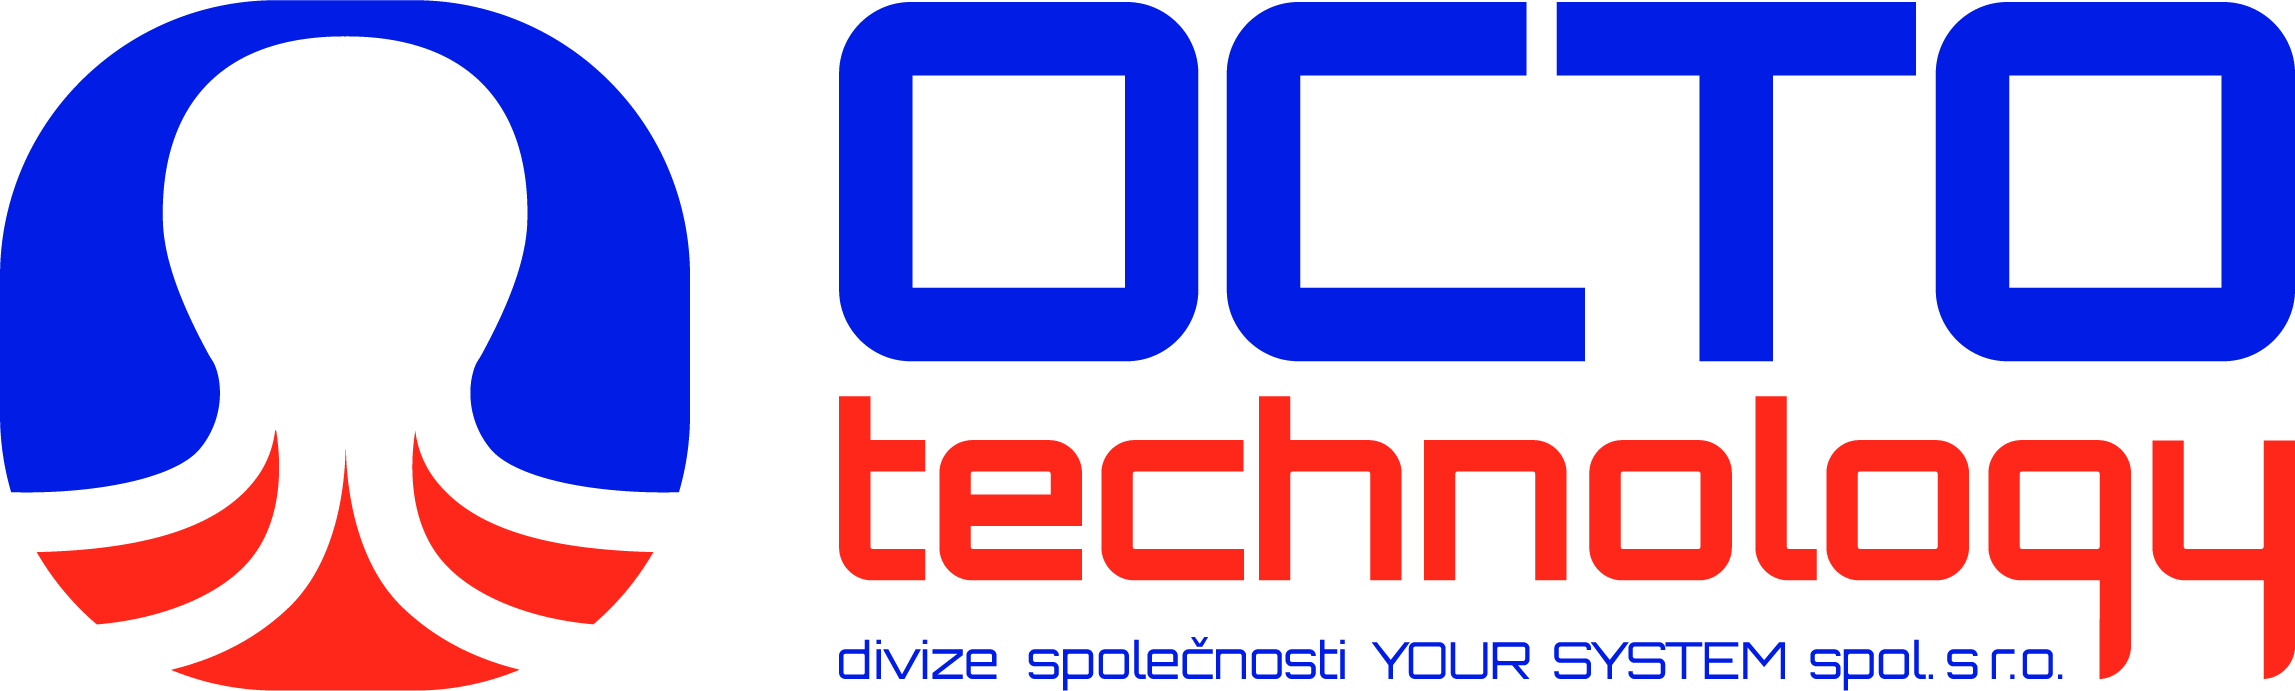 OCTO-TECHNOLOGY (divize YOUR SYSTEM, spol. s r.o.)